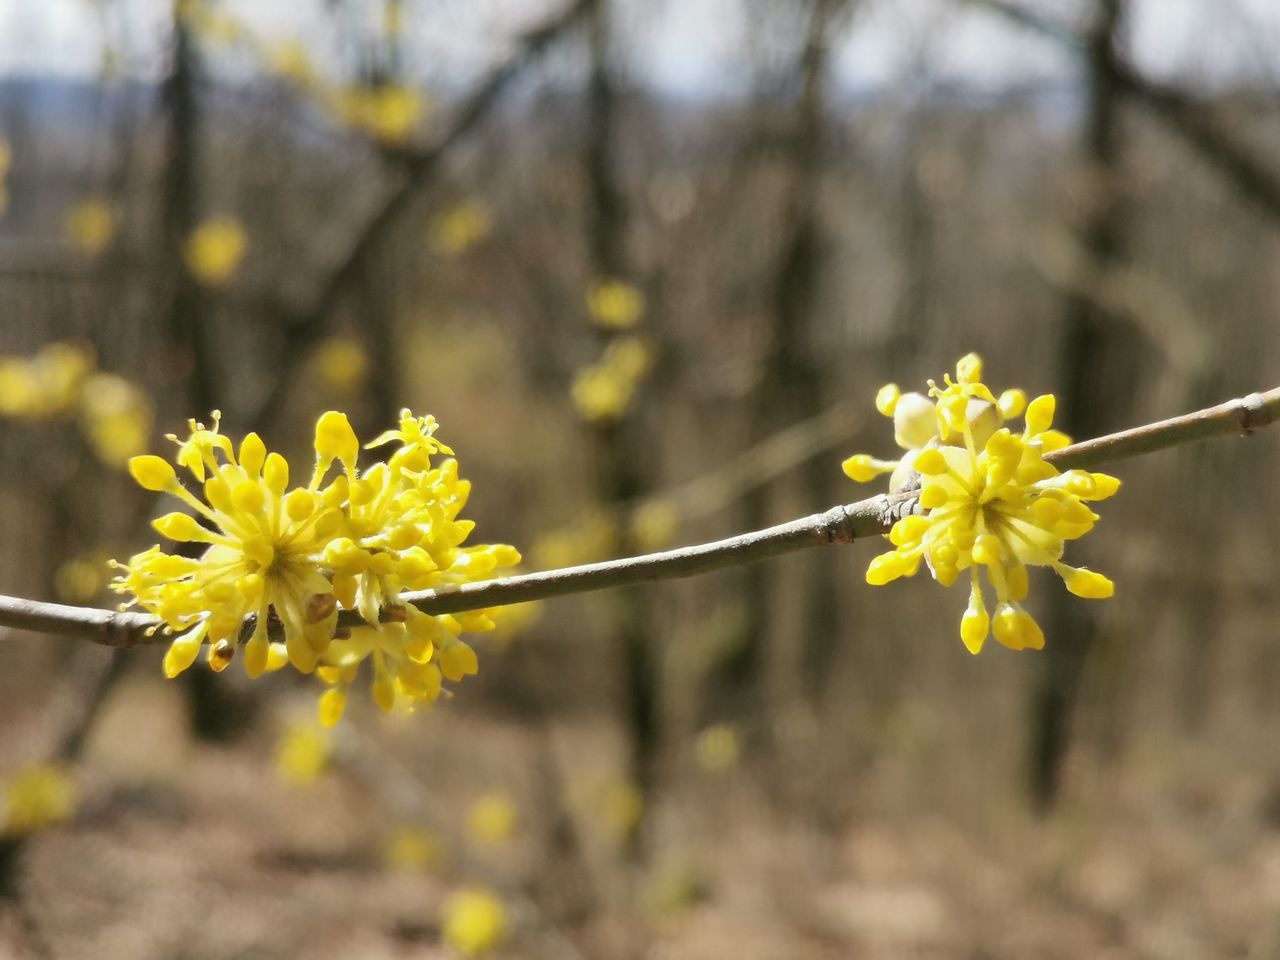 CLOSE-UP OF YELLOW FLOWERING PLANTS